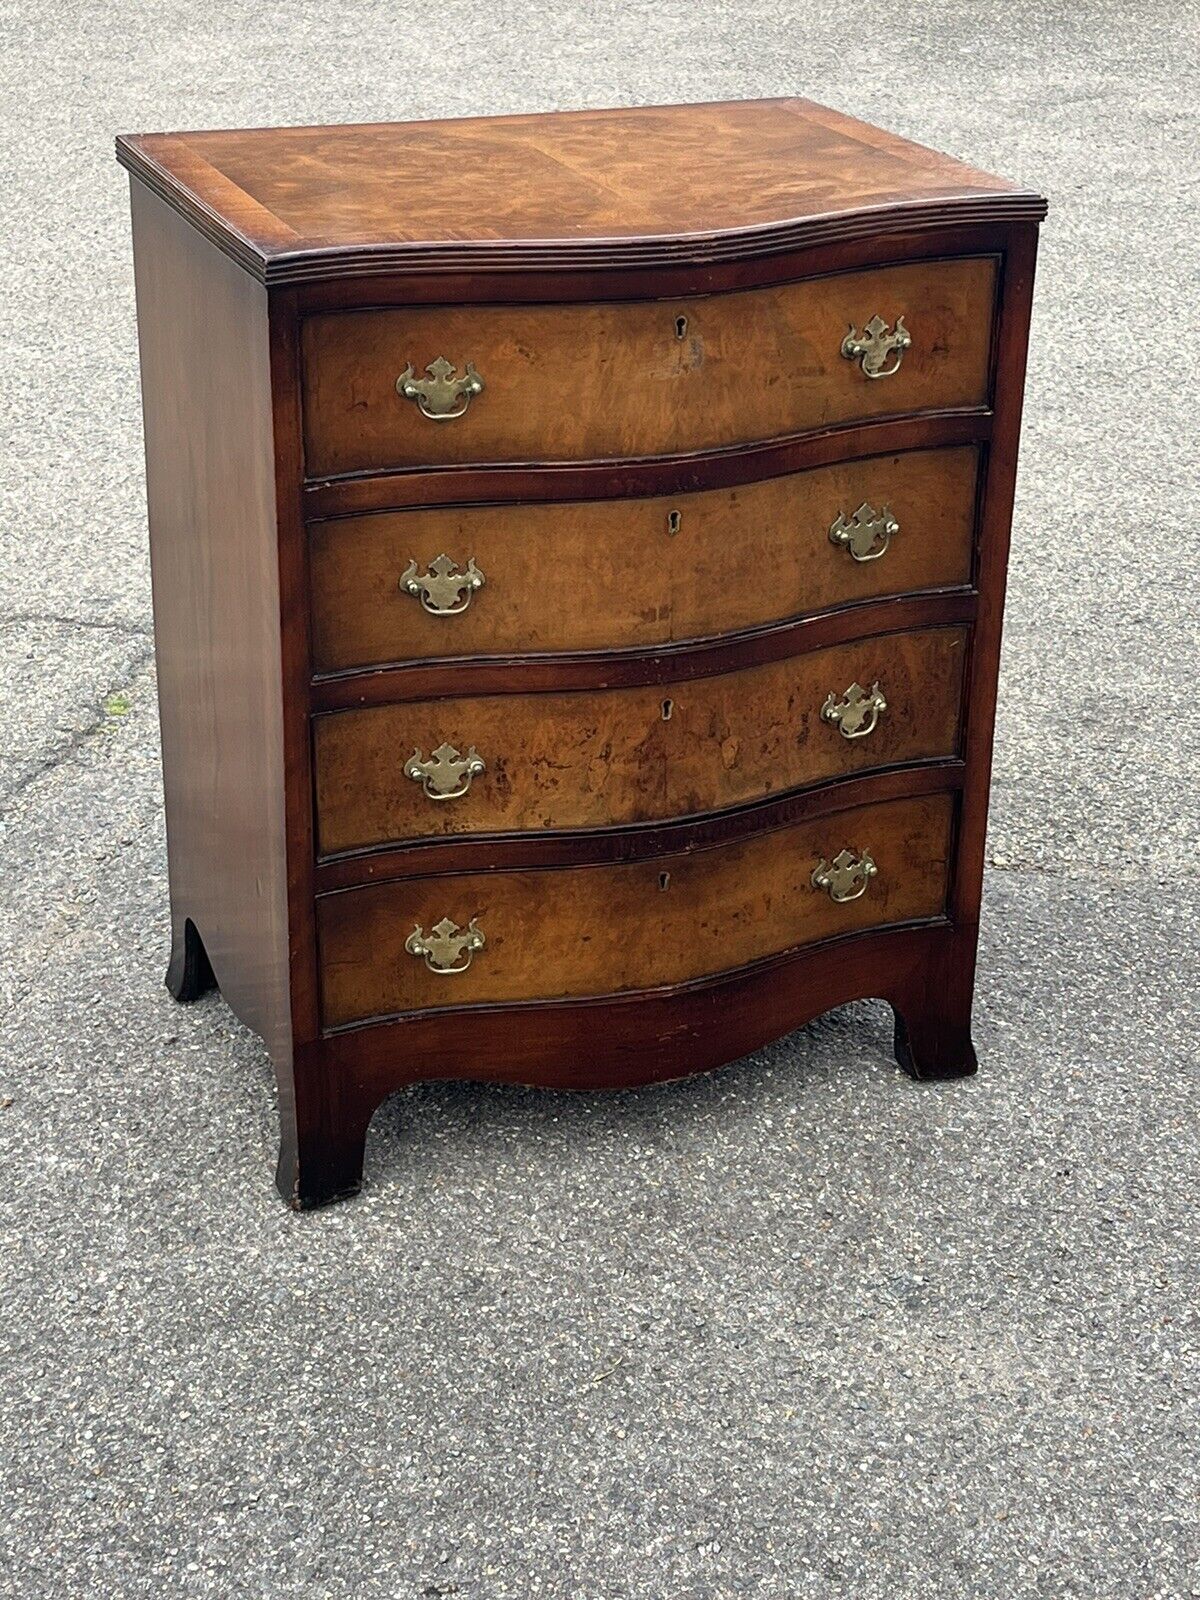 Small Burr Walnut Chest Of Drawers With Serpentine Front & Brass Handles